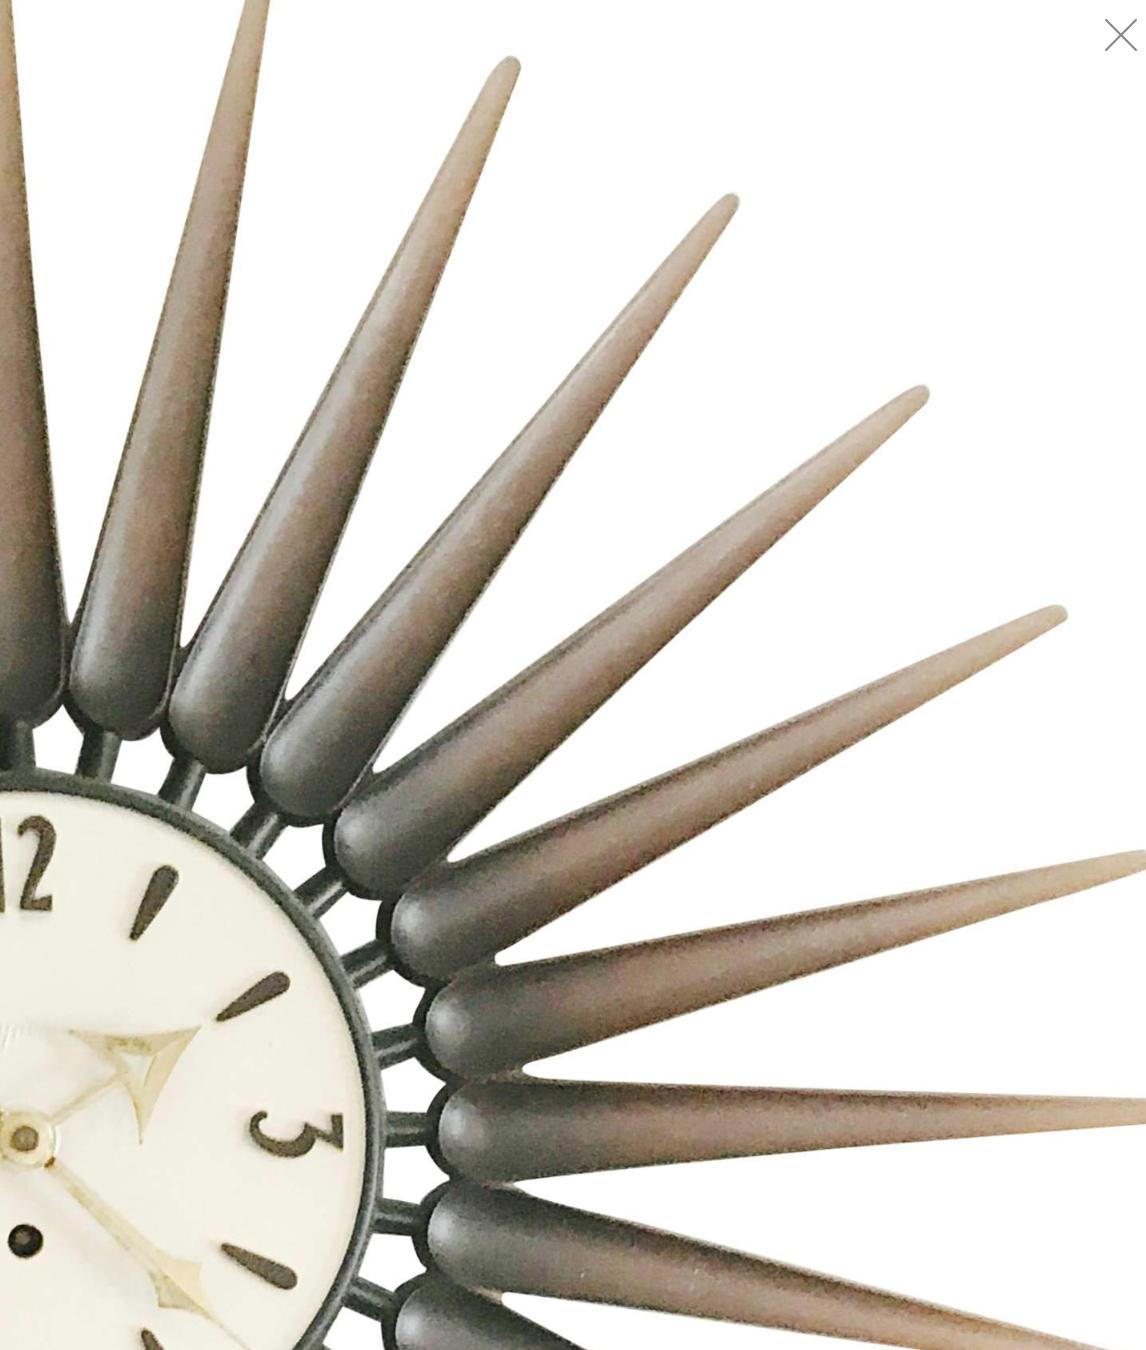 Wonderful Norwegian style starburst clock by Syroco. This Syracuse, NY based company was best known for their molded wood-pulp products that resembled hand-carving, such as this sculptural piece.

The archetypal design makes this clock appropriate